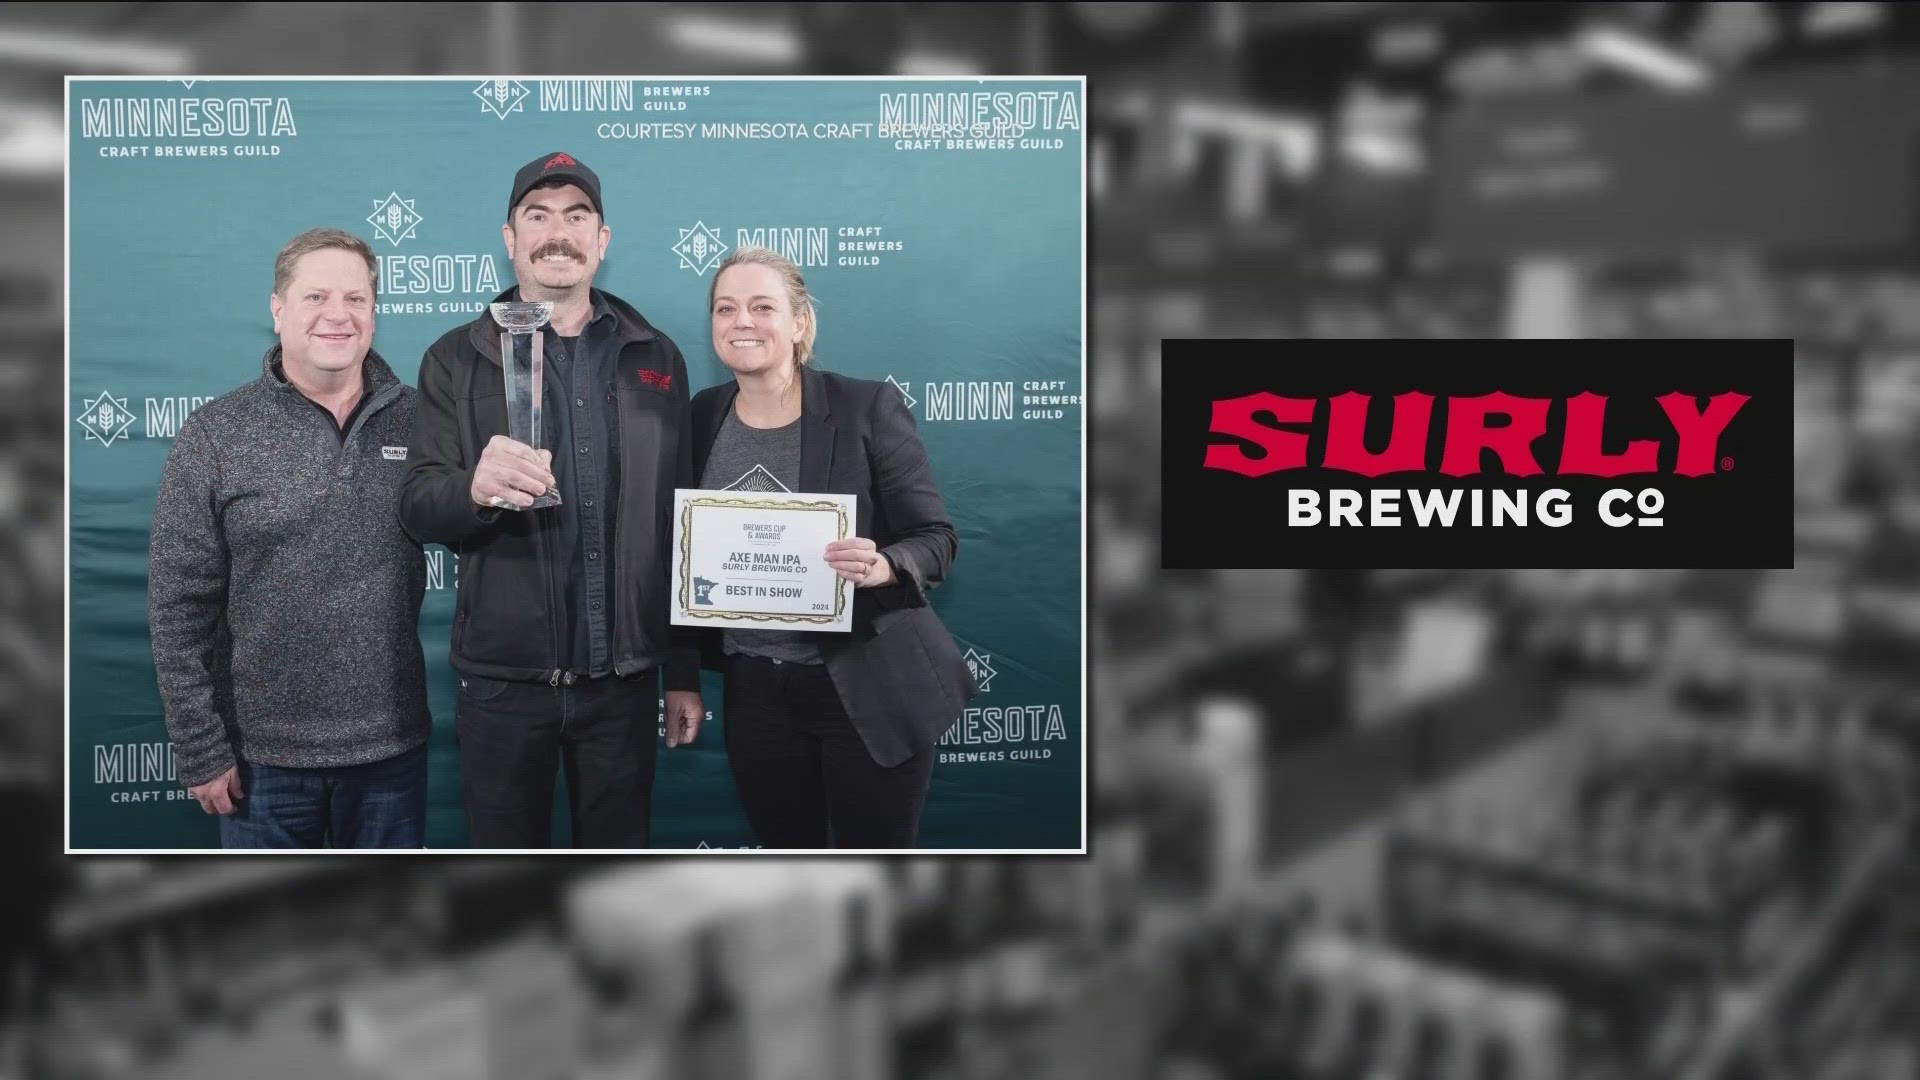 Surly won best in show for American IPAs, while Arbeiter was named best for German/International Pale Lagers and Summit's Saga Imperial IPA won for strongest beer.